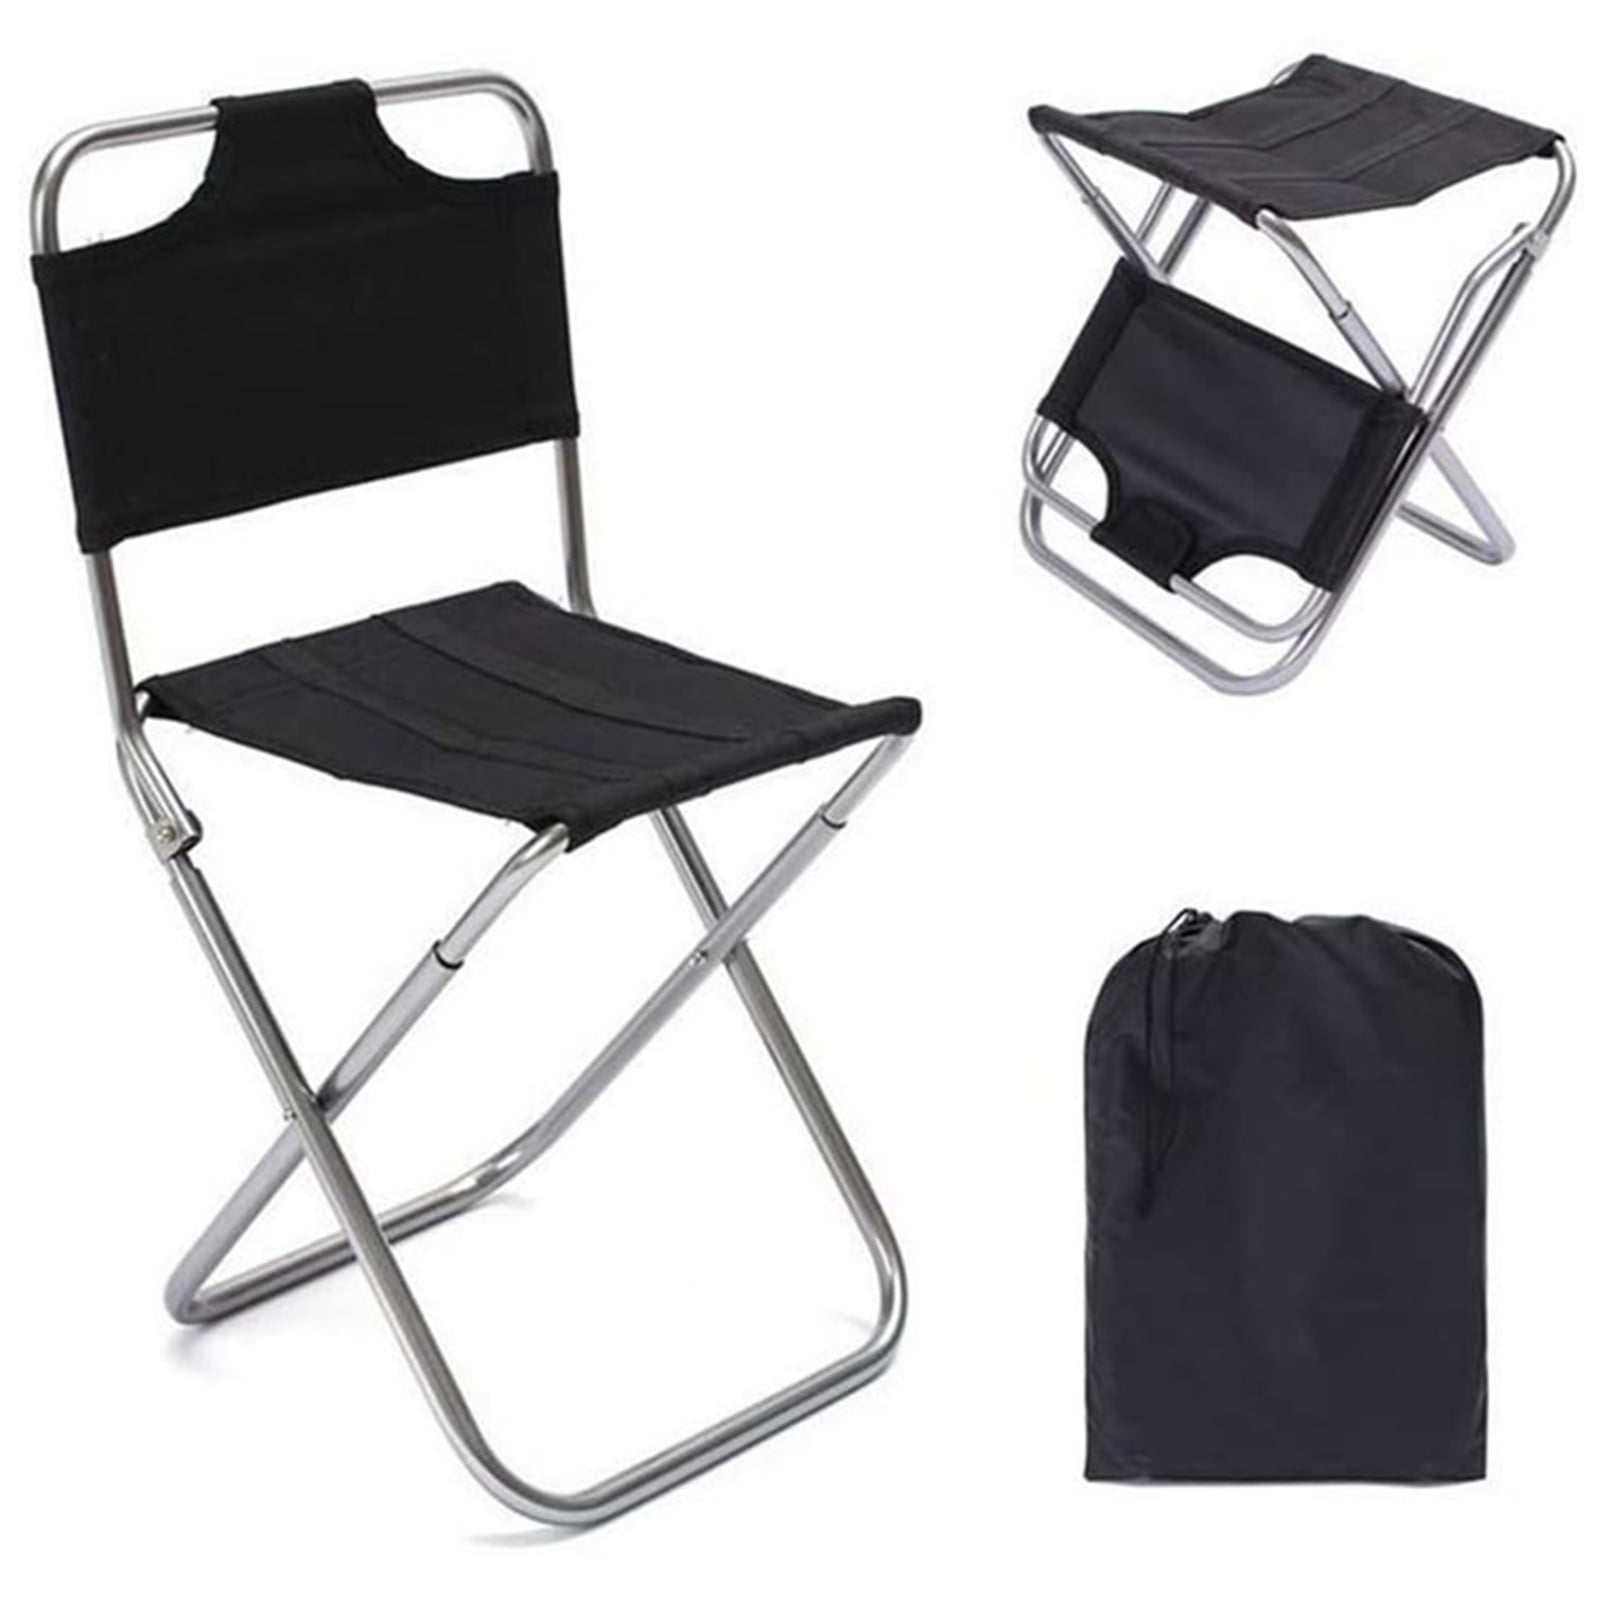 Outdoor Fishing Camping Hiking Lightweight Folding Chair Foldable Stool 